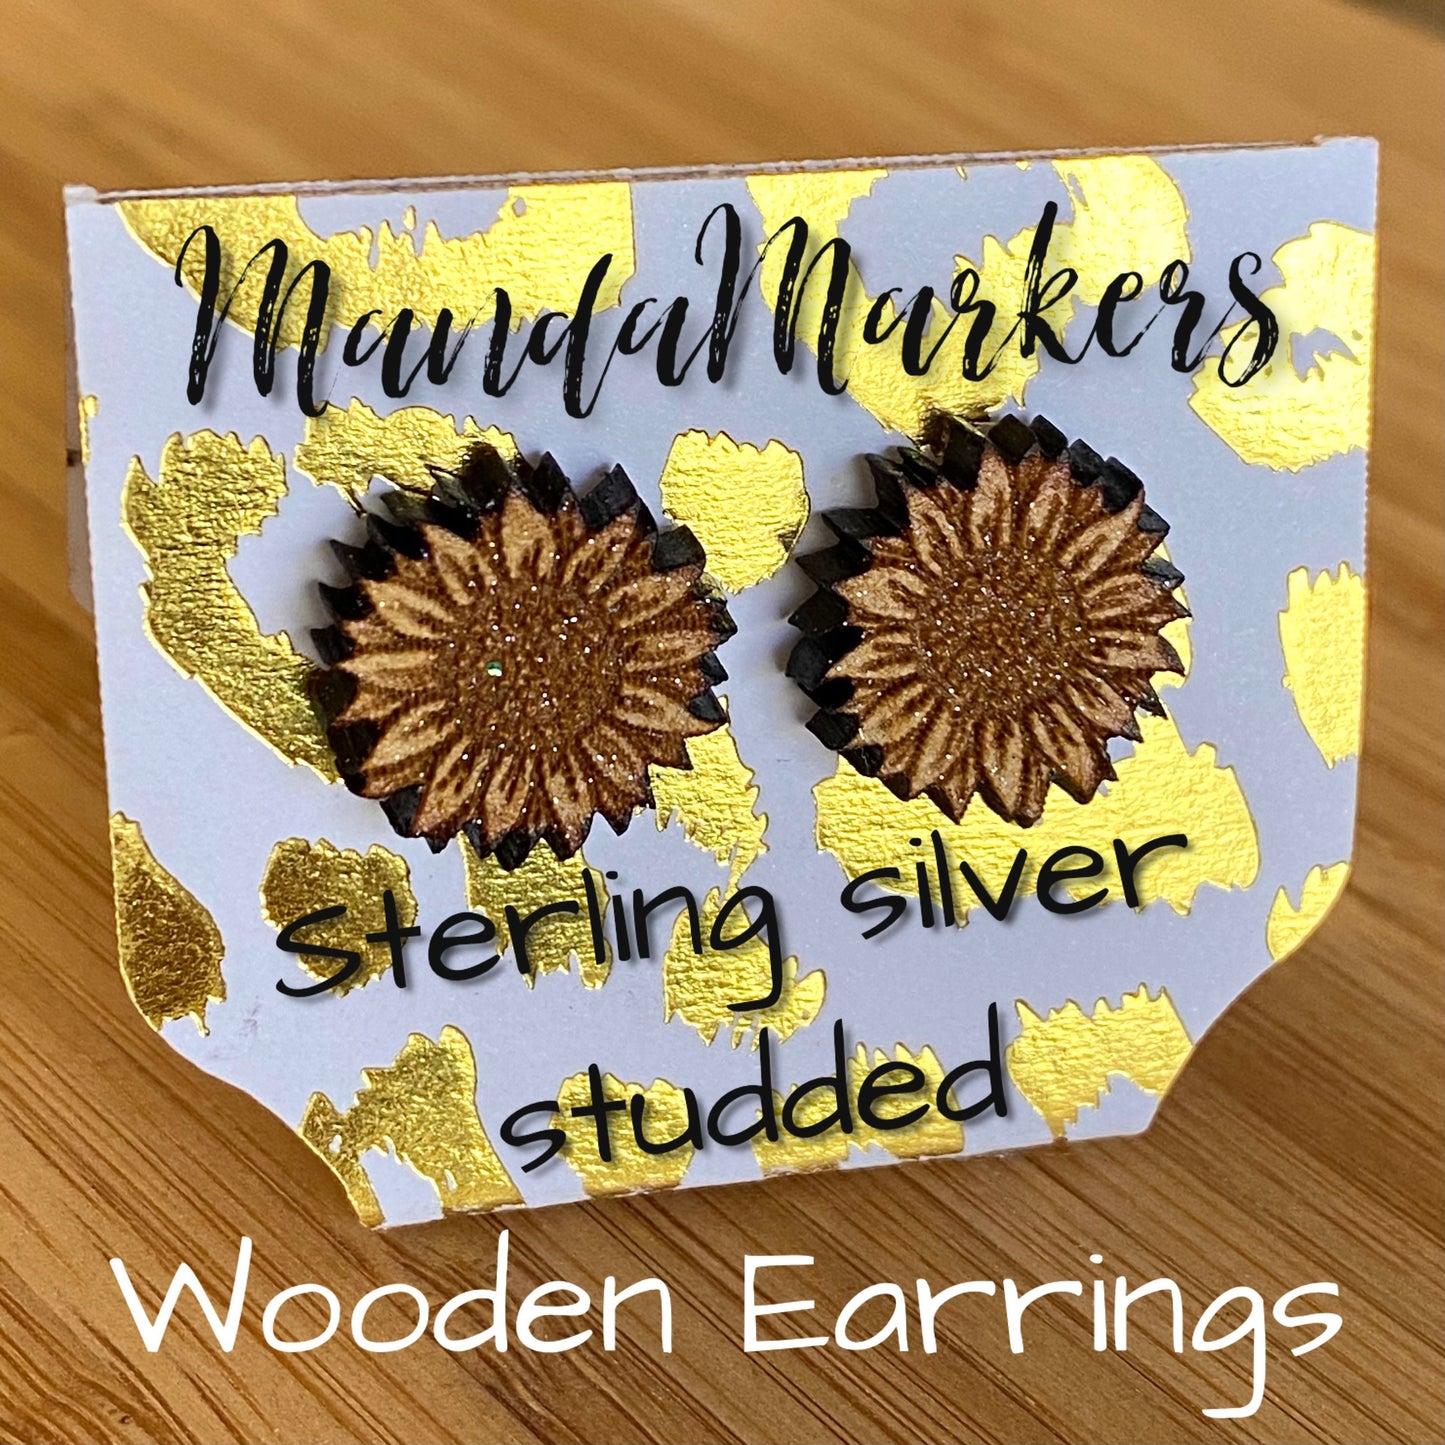 Sunflower Wooden Earrings with Sterling Silver Studs Hypoallergenic